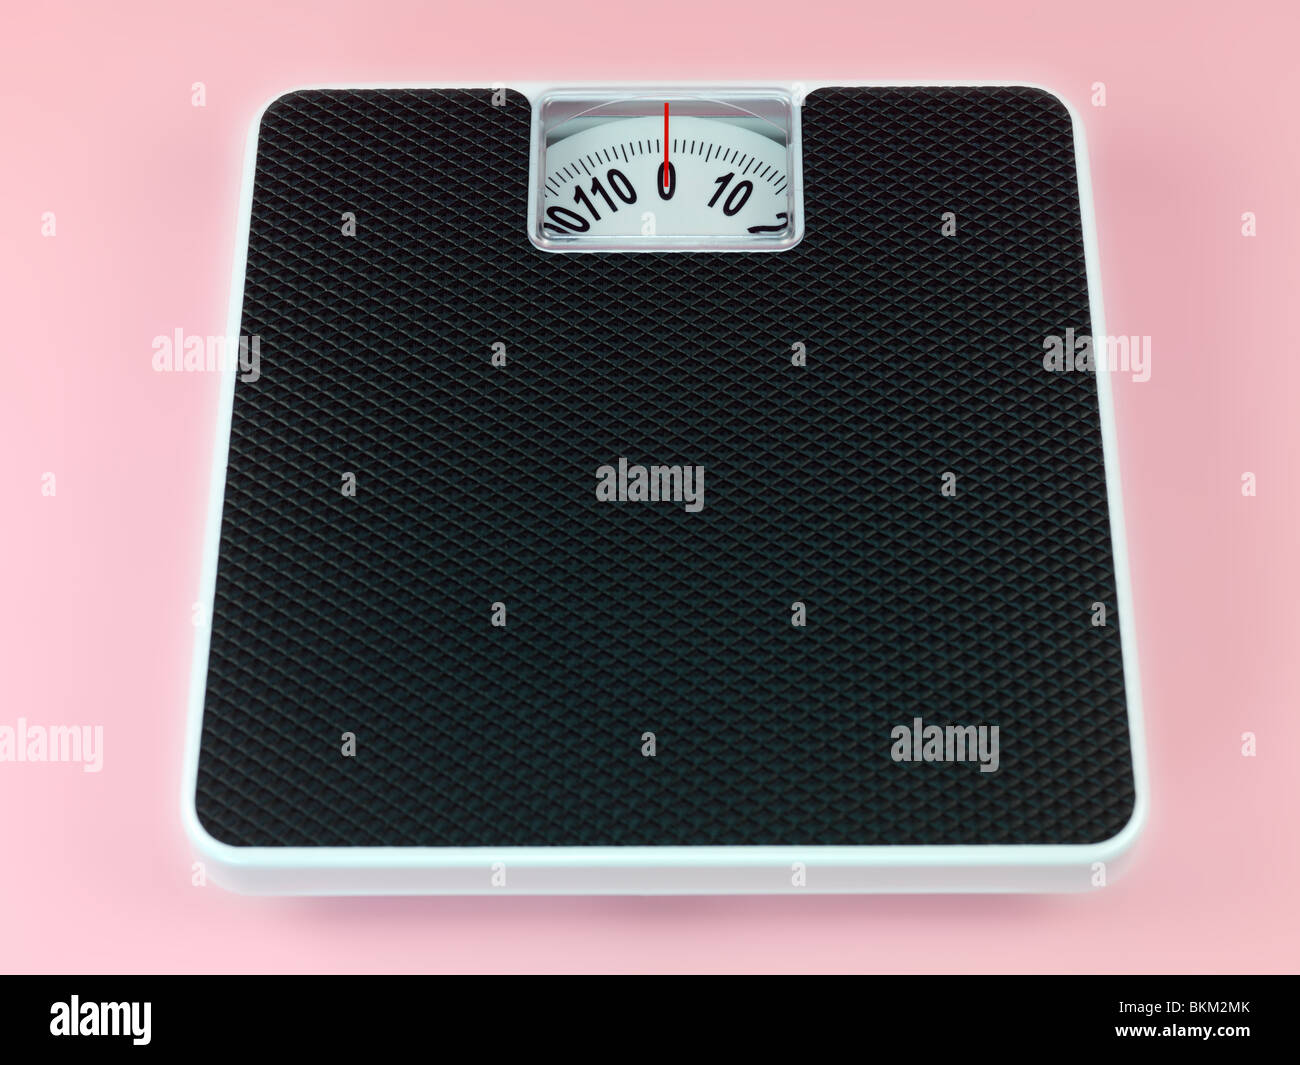 A set of bathroom scales isolated against a pink background Stock Photo